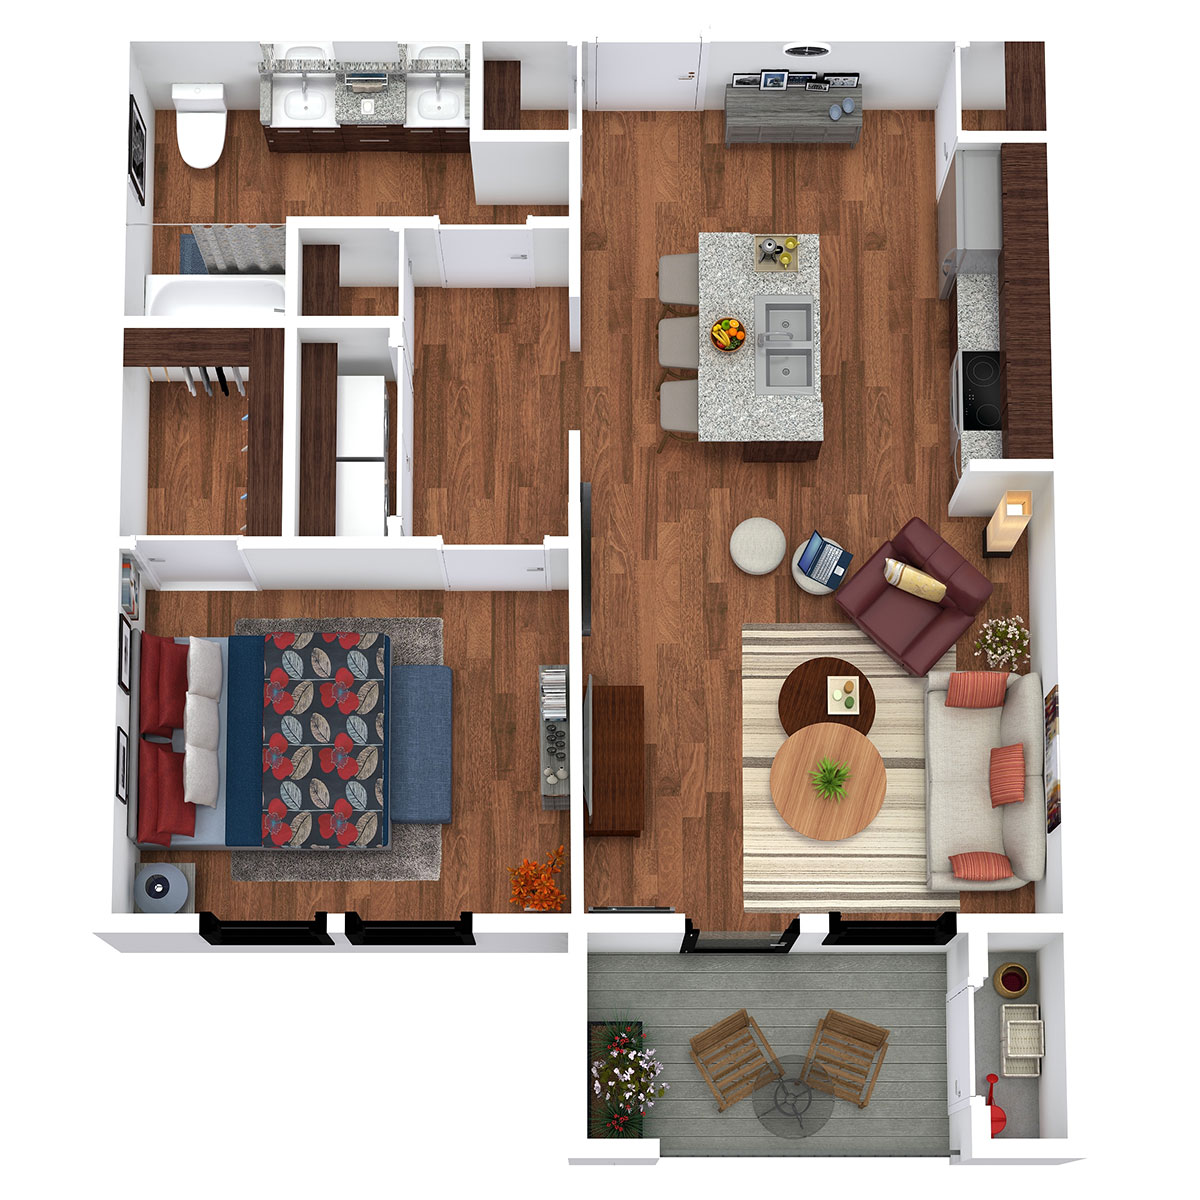 Gala at Central Park - Floorplan - 1 Bed - A1